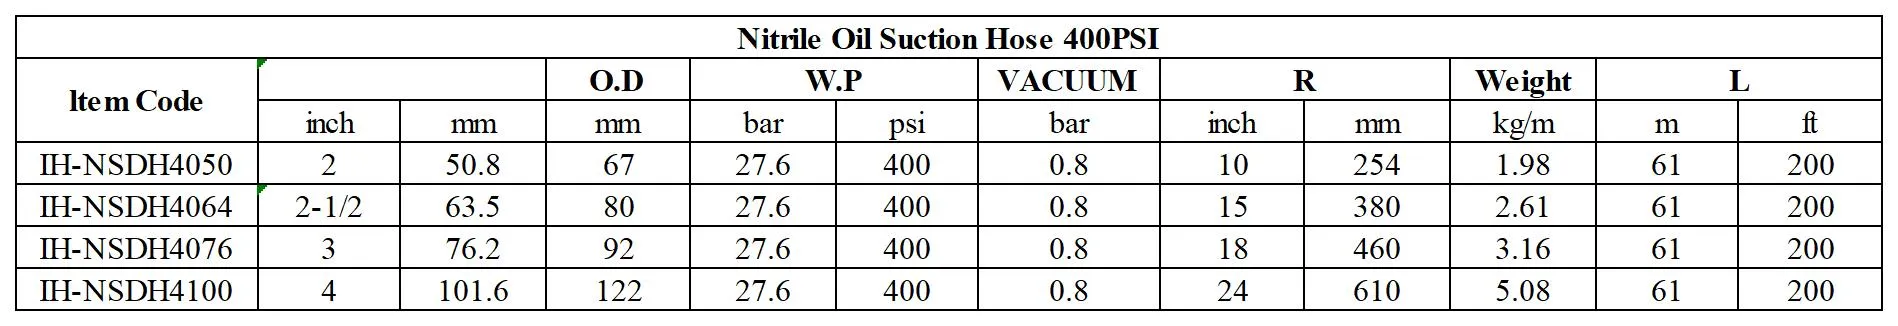 NITRILE-PETROL-SUCTION AND DISCHARGE HOSE_400PSI